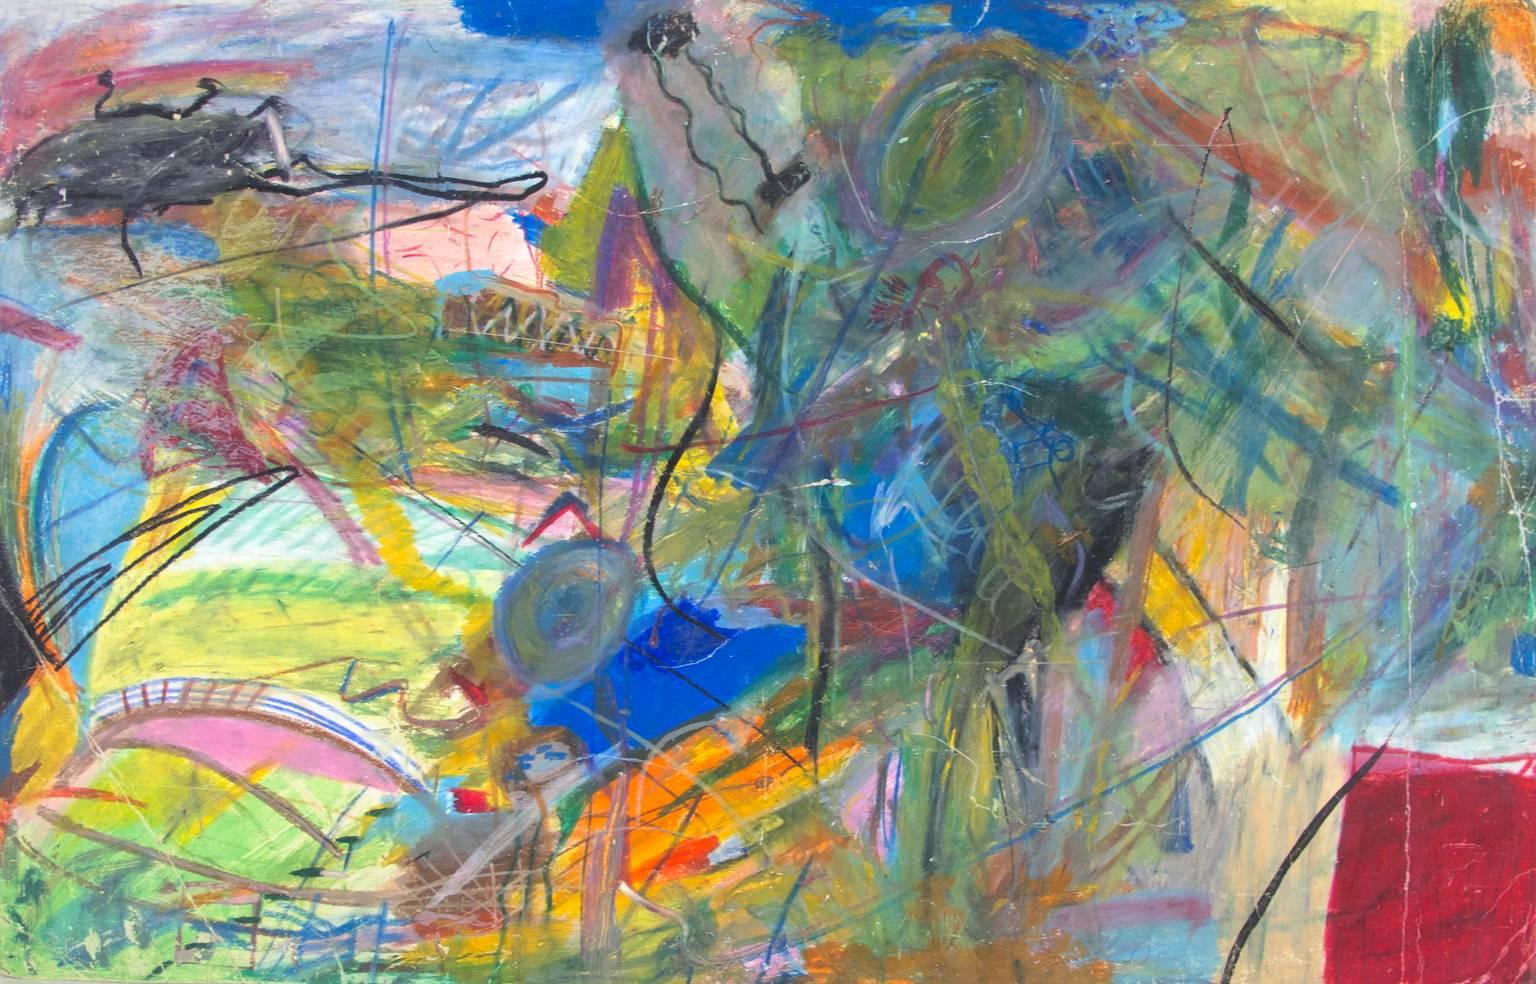 "No More Electric Toothbrushes - Part I" is an original oil pastel drawing on illustration board by Reginald K. Gee. The Artist signed the piece on the back. This piece features abstract marks and many techniques of using oil pastel. 

28" x 44"